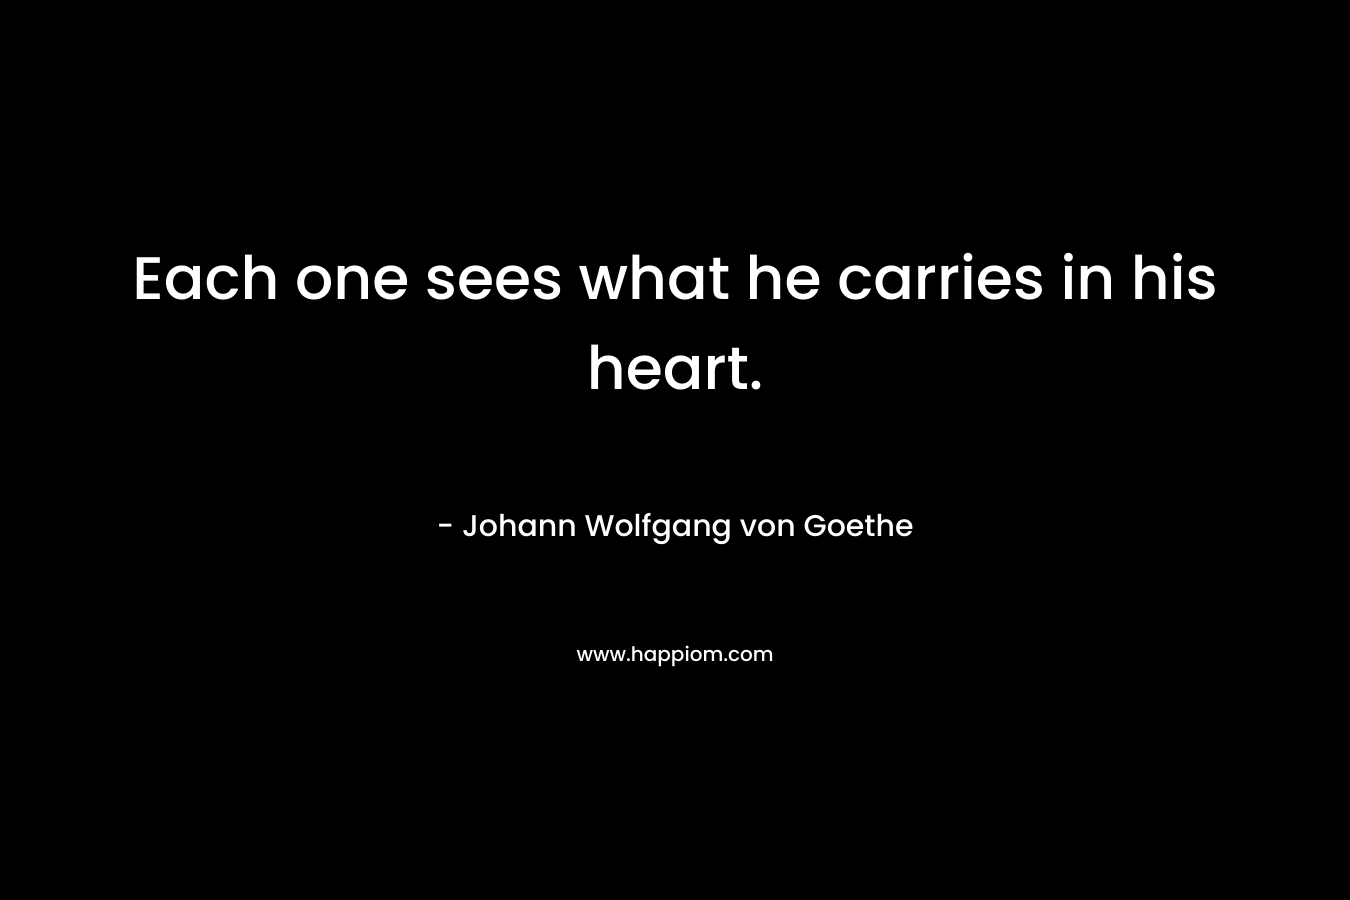 Each one sees what he carries in his heart.